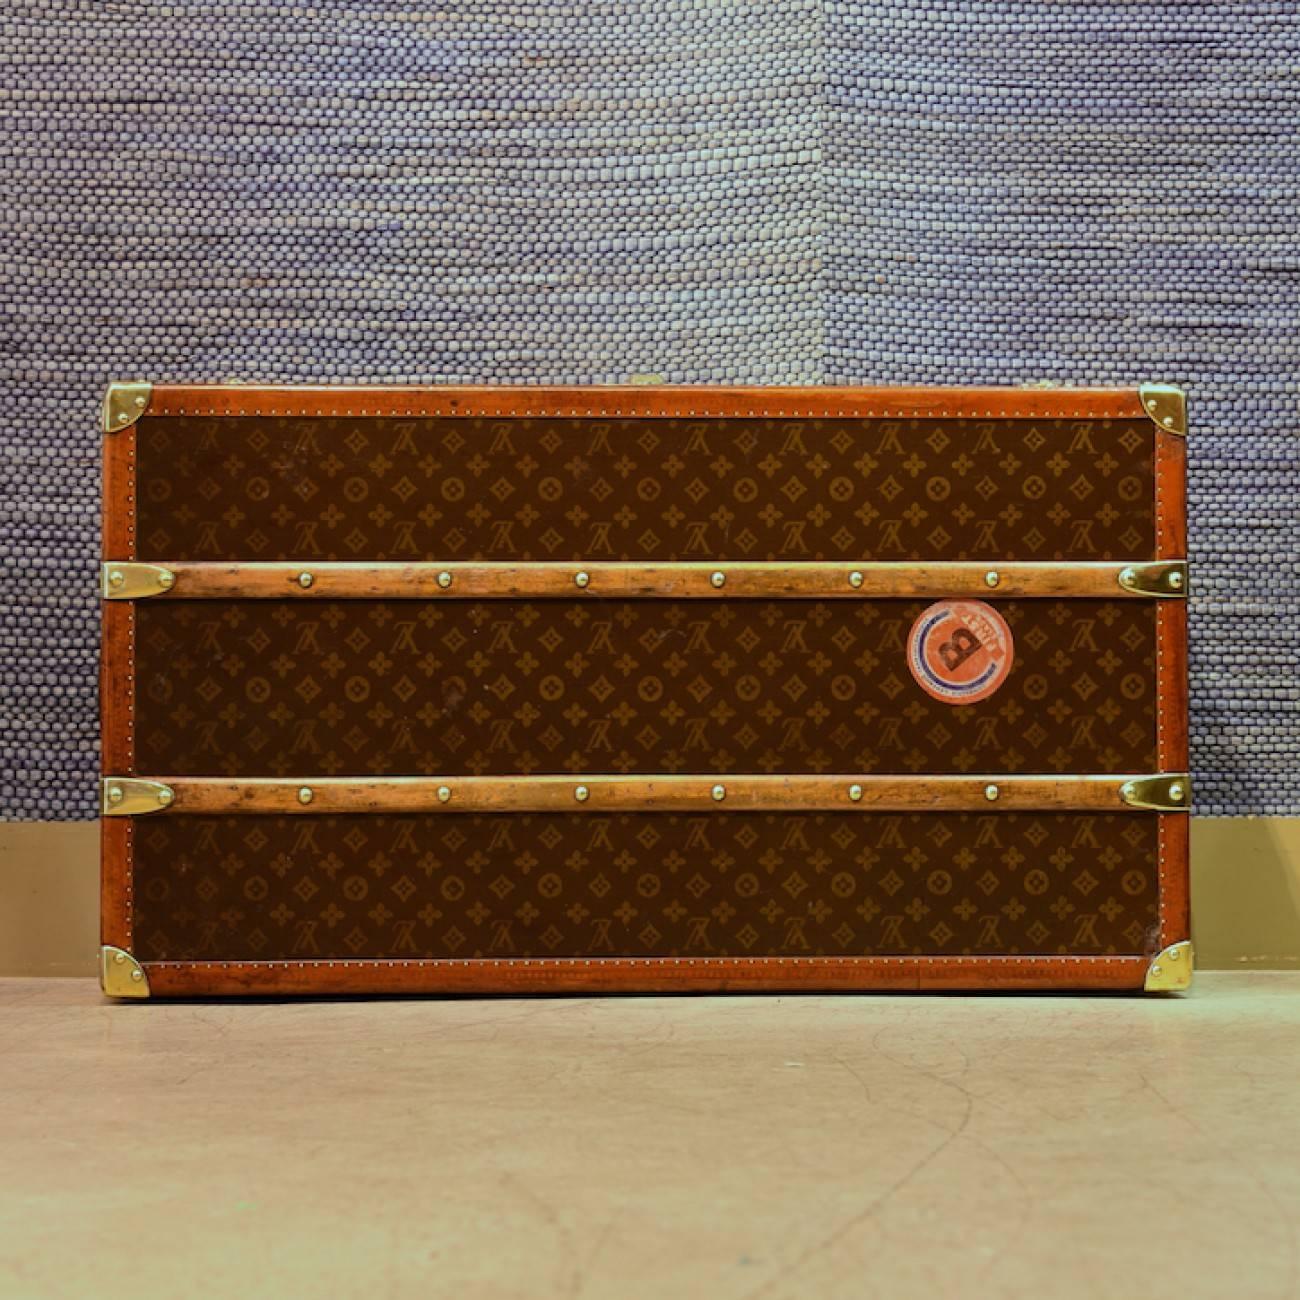 A splendid small Louis Vuitton LV monogram cabin trunk with leather handles, lozine trim and original interior with tray, circa 1940. Originally retailed by Saks of New York.

Dimensions: 90 cm/35½ inches (length) x 51 cm/20? inches (depth) x 34